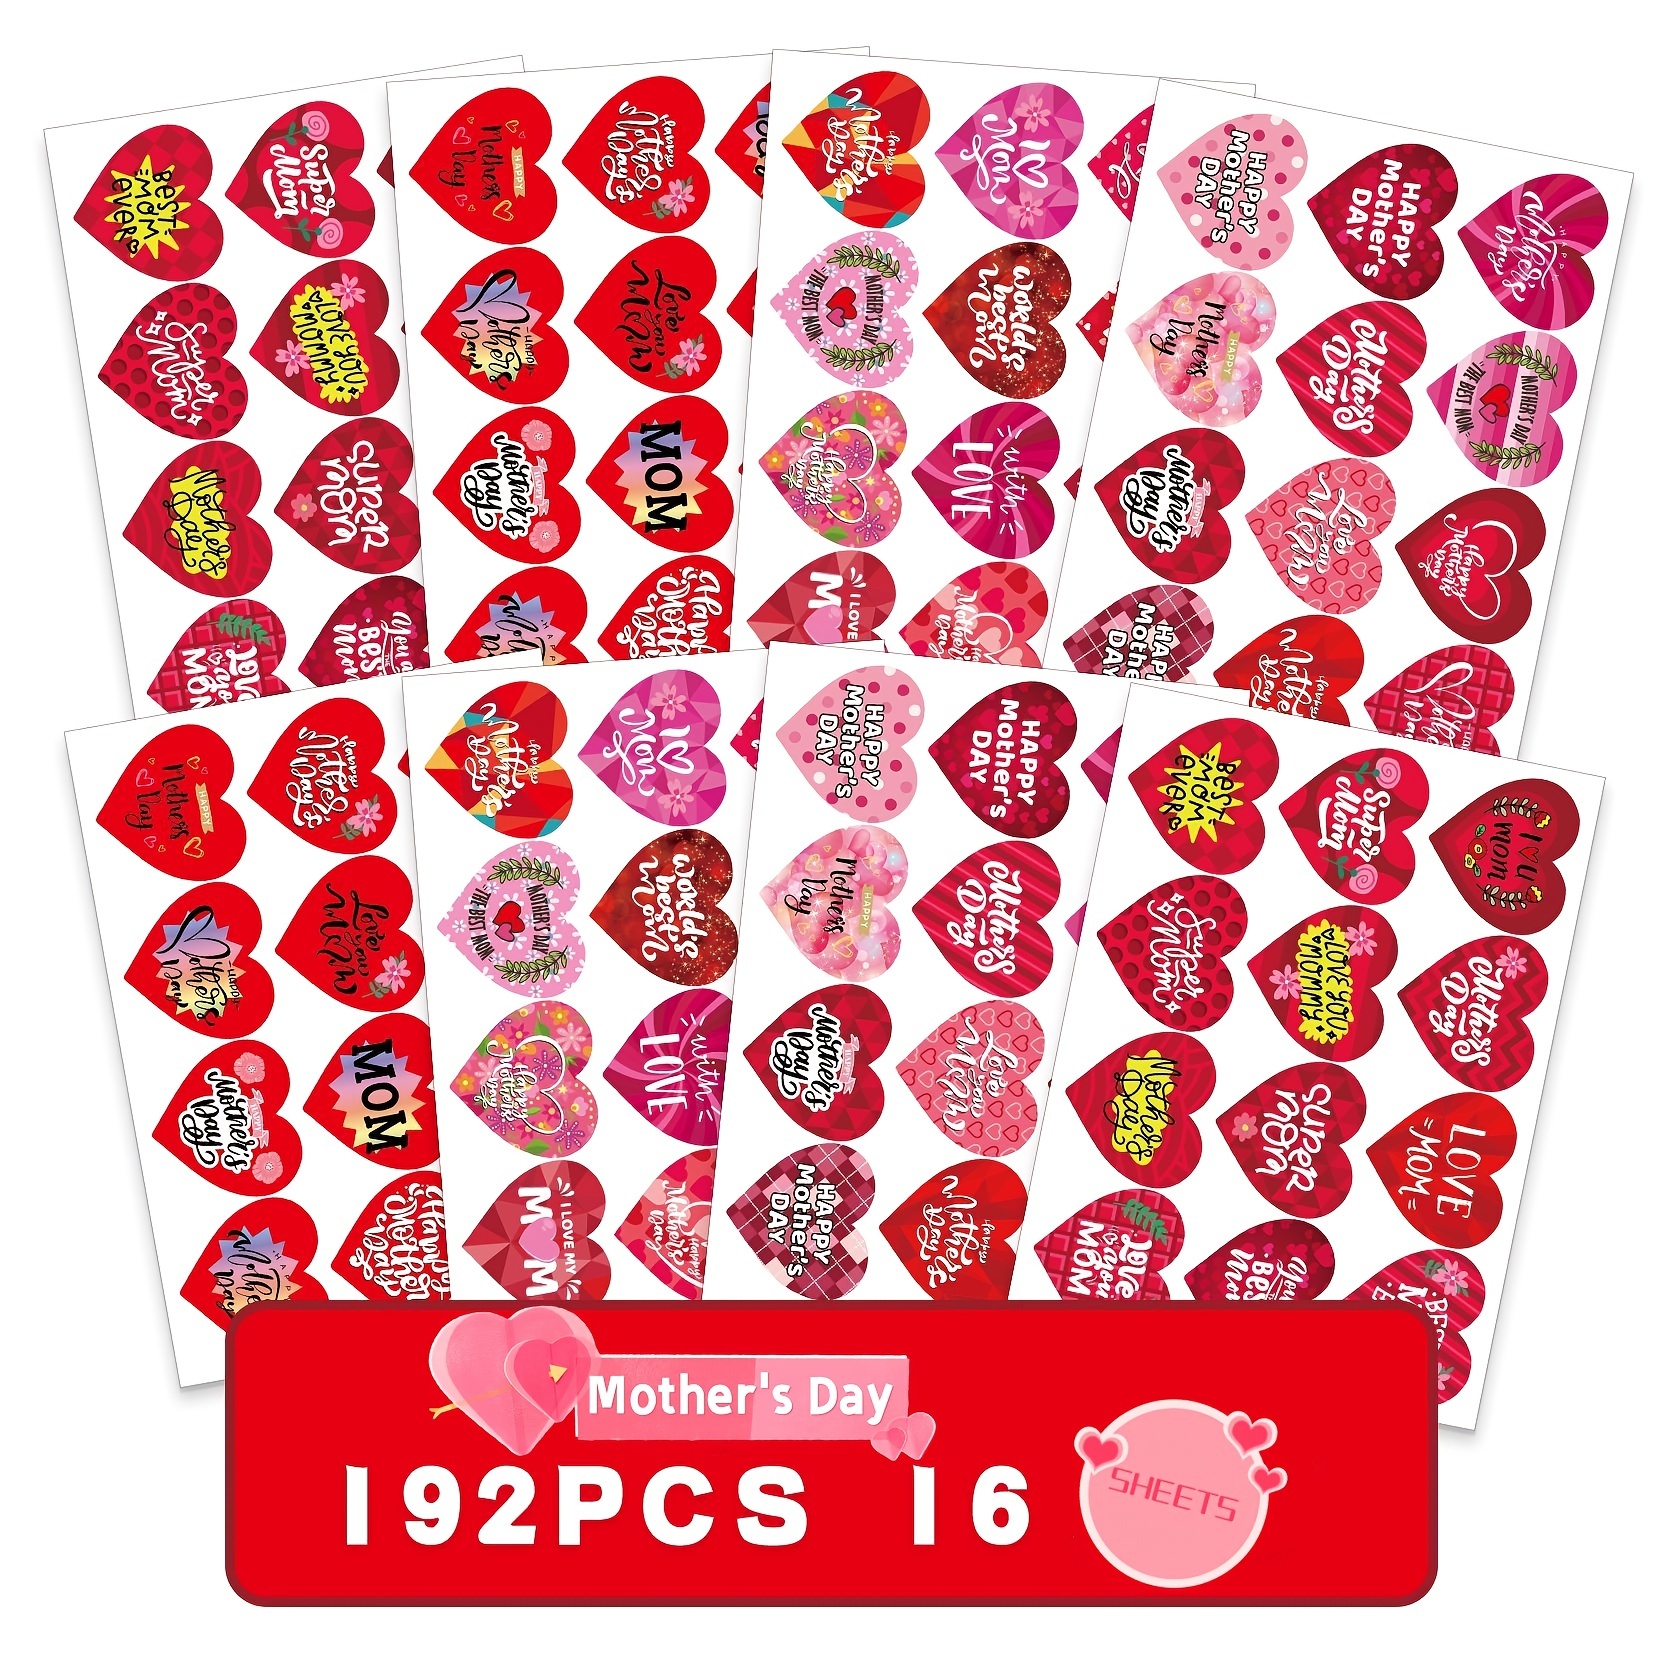 Red Heart Stickers,192 Pcs Heart Decorative Stickers for Valentines Day  Mother's Day Envelopes Wedding Scrapbooking